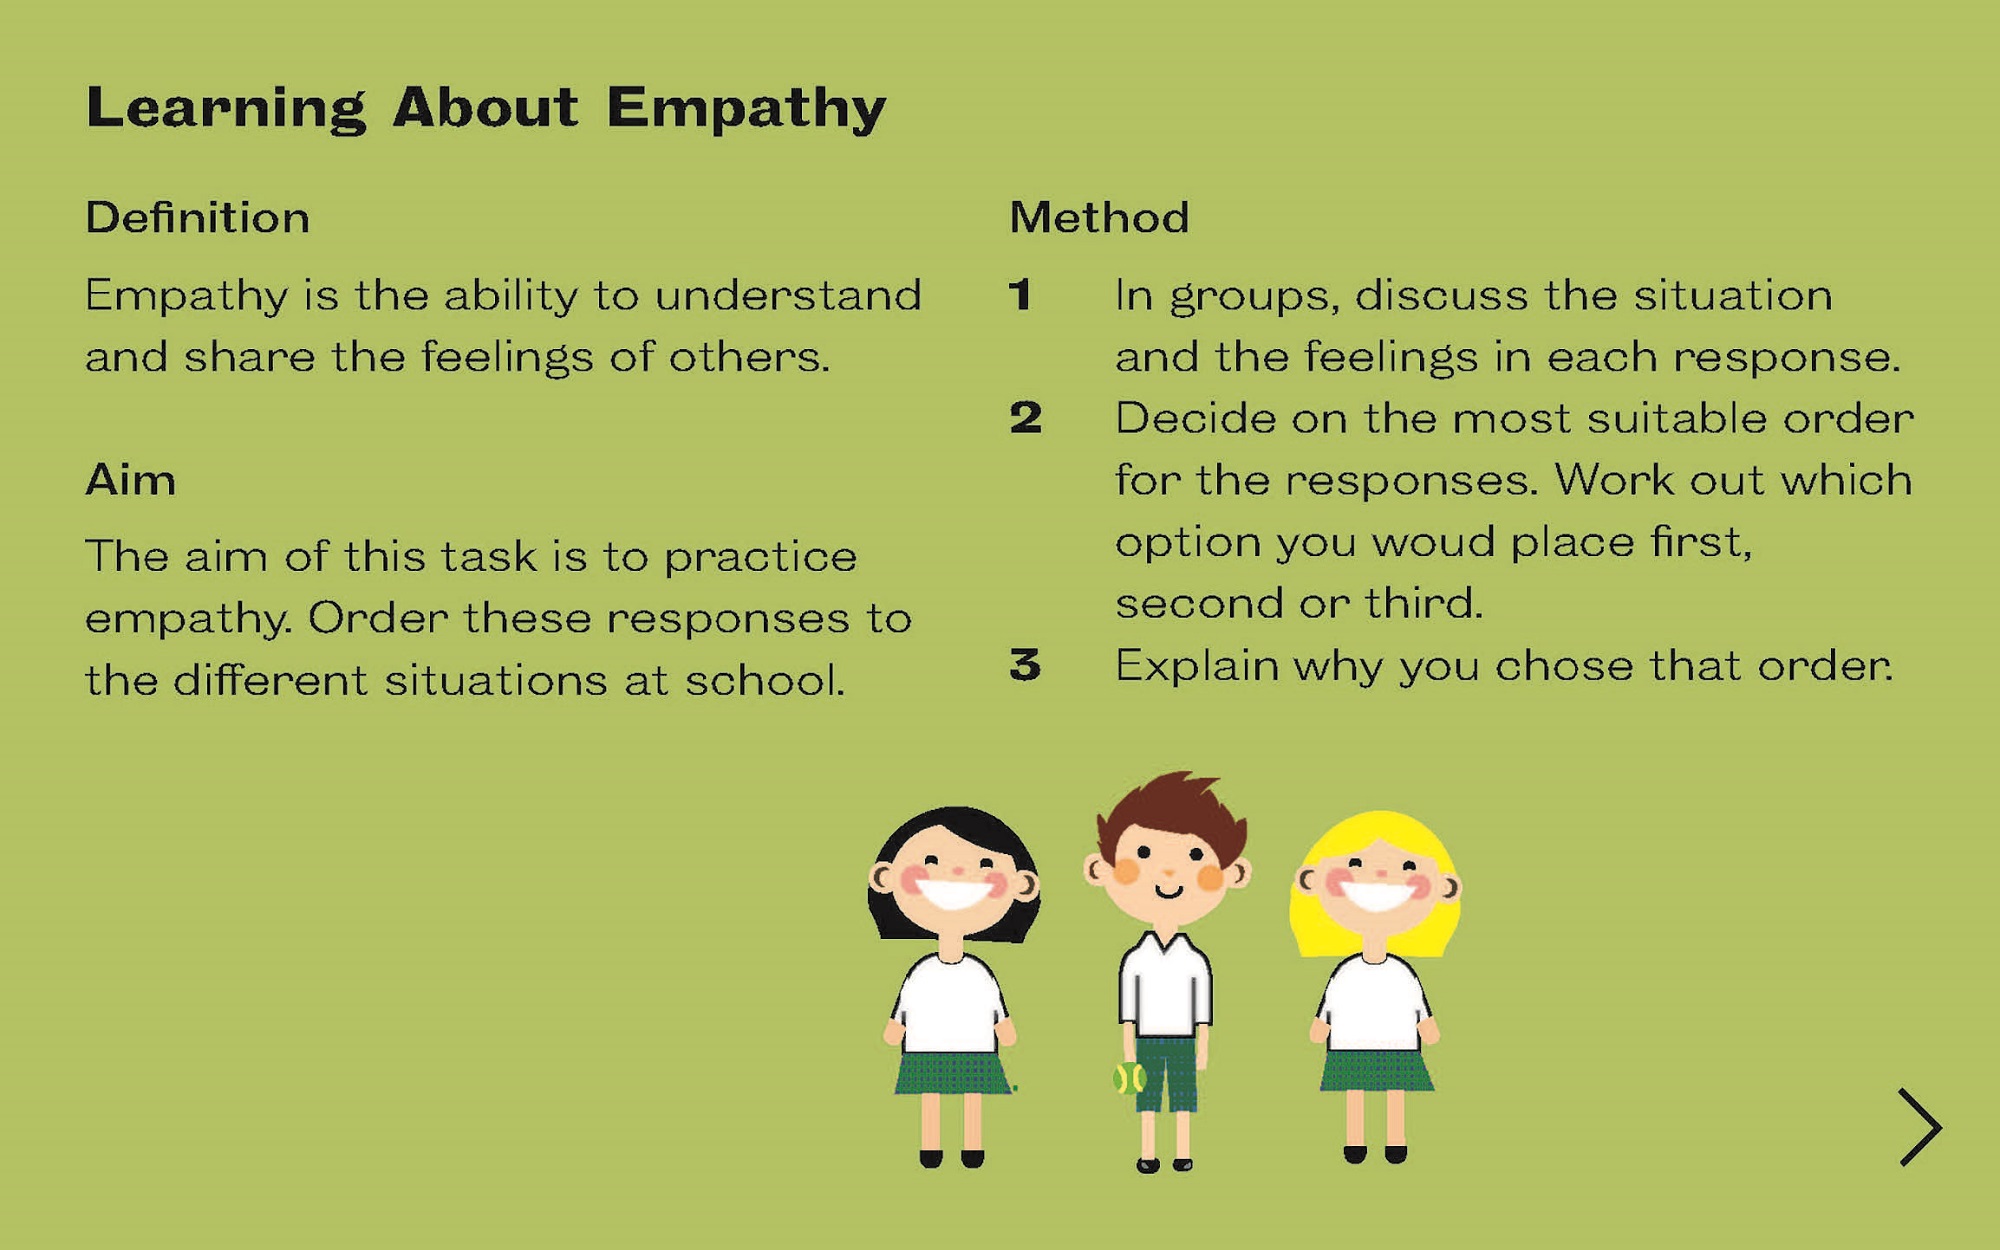 What Is Empathy? - Definition & Examples - Video & Lesson Transcript